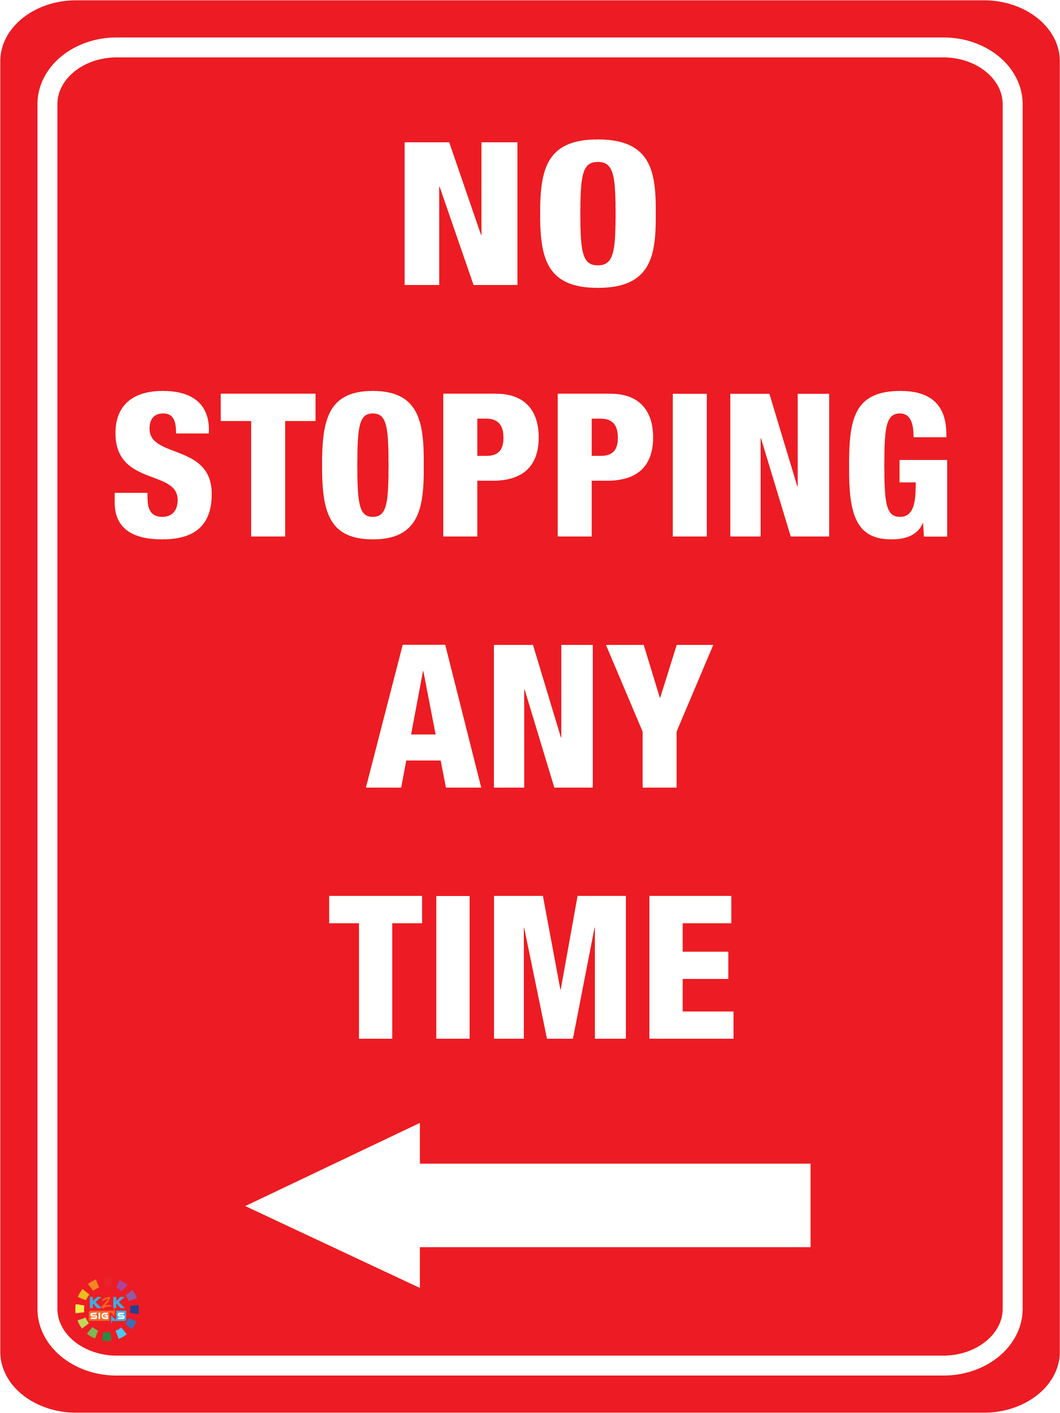 No Stopping At Any Time - Left Arrow Sign